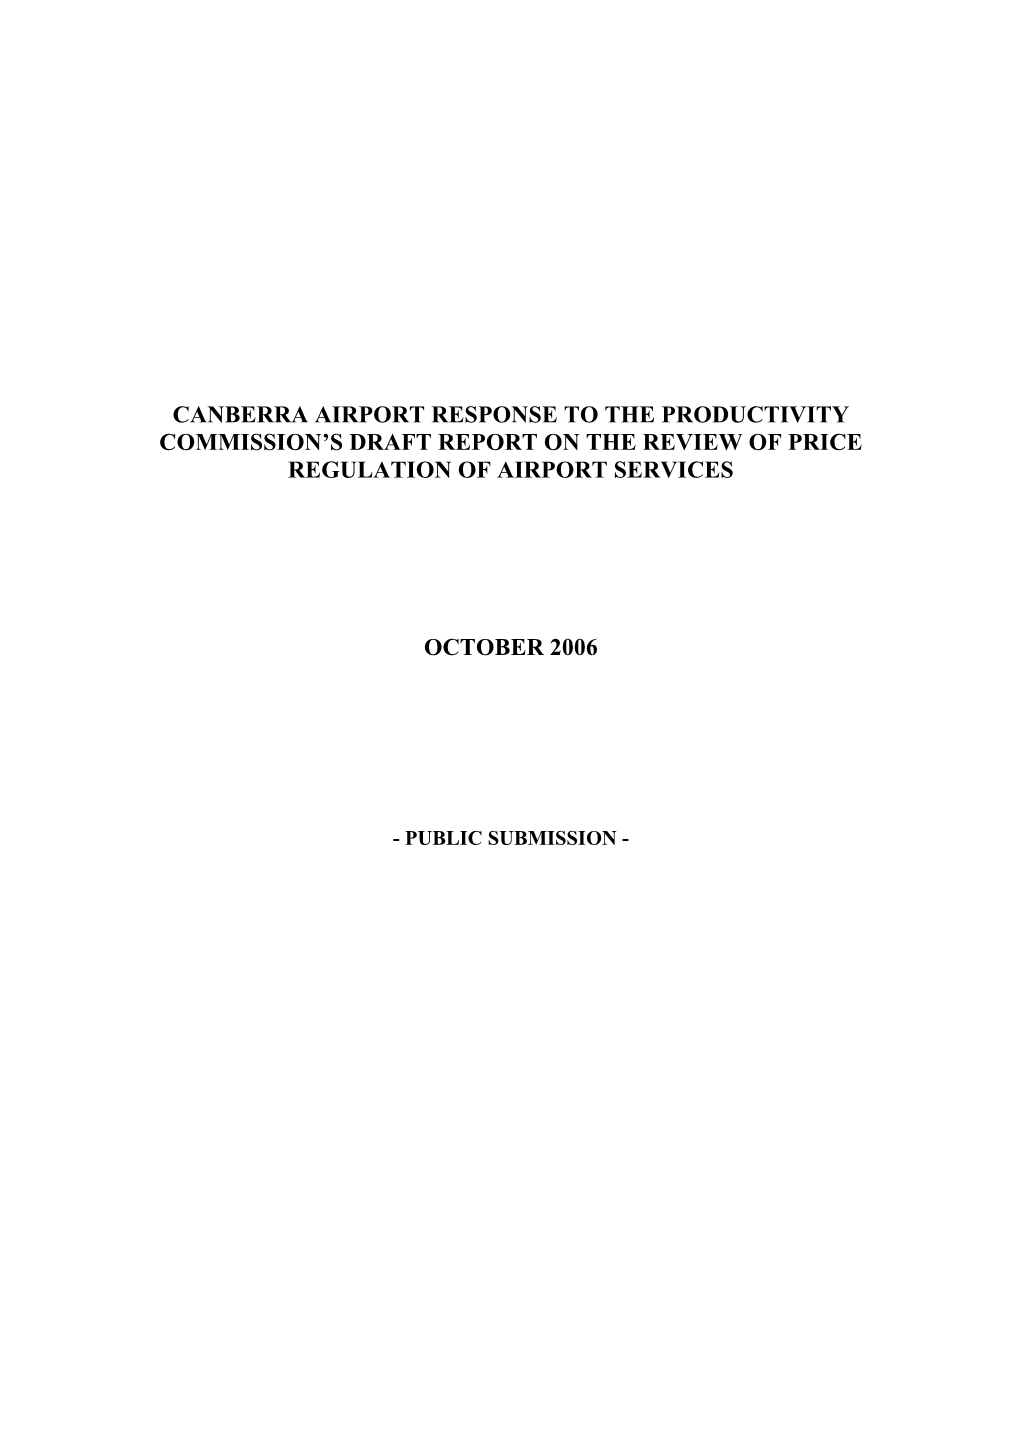 Canberra Airport Response to the Productivity Commission's Draft